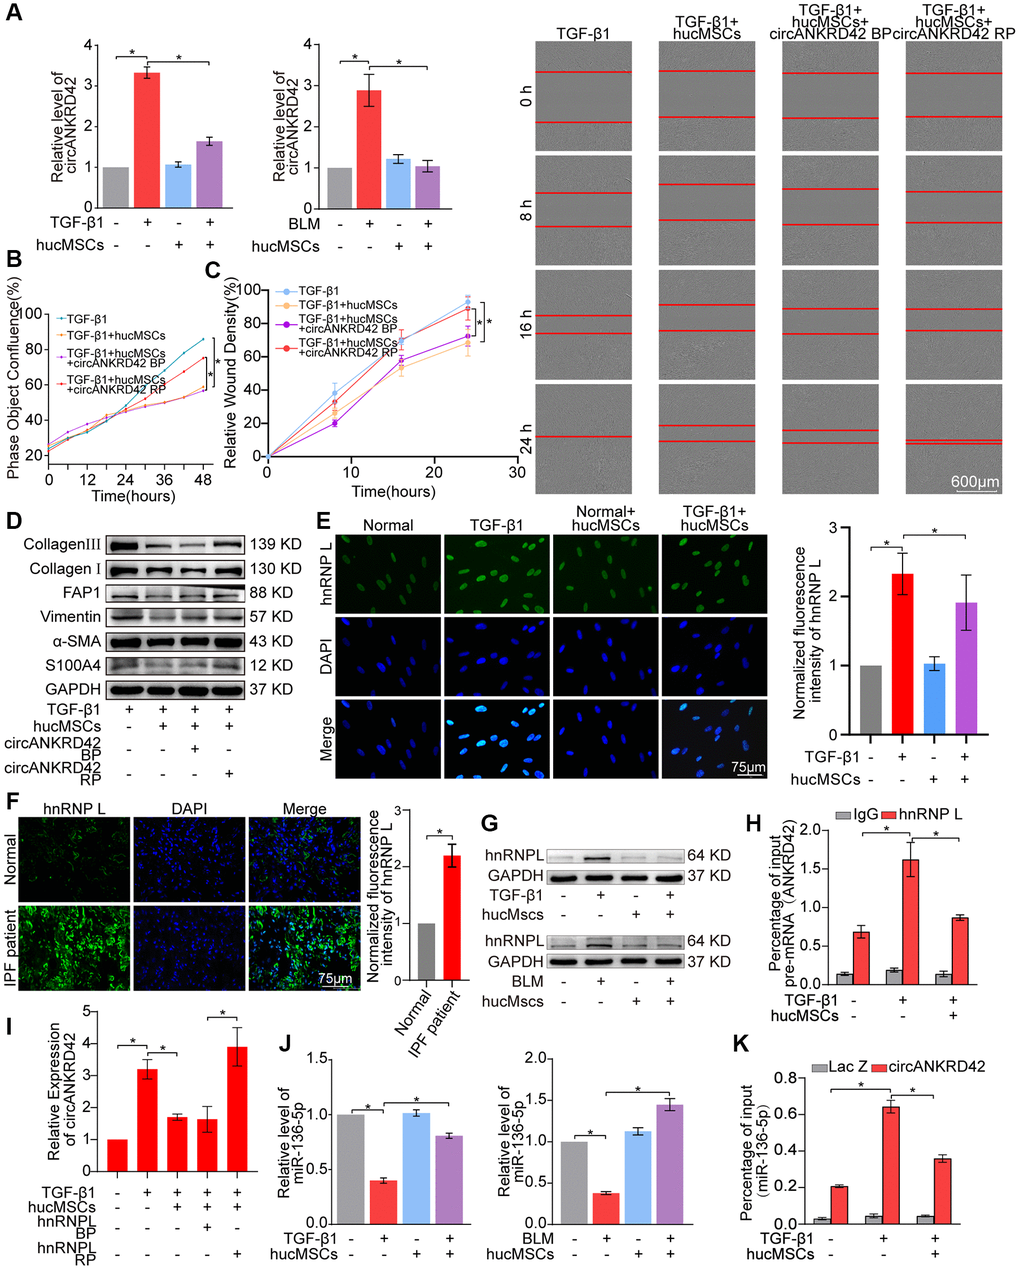 hucMSCs treatment alleviated pulmonary fibrosis by preventing circANKRD42 reverse splicing biogenesis. (A) qRT-PCR result illustrated that hucMSCs treatment reduced the expression level of circANKRD42 compared with TGF-β1/BLM treatment in vivo and in vitro. (B) Rescue experiment of cell proliferation showed that hucMSCs treatment reduced the TGF-β1-induced cell proliferation. circANKRD42 overexpression increased the cell proliferation and reversed the downward trend caused by hucMSCs treatment. (C) Rescue experiment of cell scratch assay monitored with an IncuCyte S3 instrument validated that hucMSCs treatment blocked the cell migration. circANKRD42 overexpression promoted the cell migration and reversed the downward trend caused by hucMSCs treatment. (D) Rescue experiment showed that hucMSCs treatment reduced the expression of S100A4, FAP1, α-SMA, vimentin, and collagen I and III. circANKRD42 overexpression increased the expression of S100A4, FAP1, α-SMA, vimentin, and collagen I and III and reversed the downward trend caused by hucMSCs treatment. (E) Immunofluorescence images exhibited that hnRNP L was located in the nucleus and its expression decreased in the hucMSCs treatment group compared with that in the TGF-β1 group. (F) Example of hnRNP L immunofluorescence images depicted that hnRNP L expression was increased in patients with IPF compared with that in normal individuals. (G) Western blot analysis identified that hucMSCs treatment inhibited hnRNP L expression compared with that in the TGF-β1/BLM group in vivo and in vitro. (H) RIP uncovered that hnRNP L bound to pre-mRNA (ANKRD42) and hucMSCs treatment reduced the binding amount of hnRNP L with pre-mRNA (ANKRD42). (I) qRT-PCR was performed to prove that the inhibitory effect of hucMSCs on circANKRD42 depending on hnRNP L. (J) MiR-136-5p expression markedly decreased in the TGF-β1/BLM group and increased in the hucMSCs treatment group in vivo and in vitro. (K) RAP experiment showed that miR-136-5p was enriched in circANKRD42; this enrichment was intensified by TGF-β1 and decreased by hucMSCs treatment. Lac Z was the control. BP indicates blank plasmid, and RP indicates the recombinant plasmid of overexpressed circANKRD42. Each bar represents the mean ± SD; n = 6; *p 